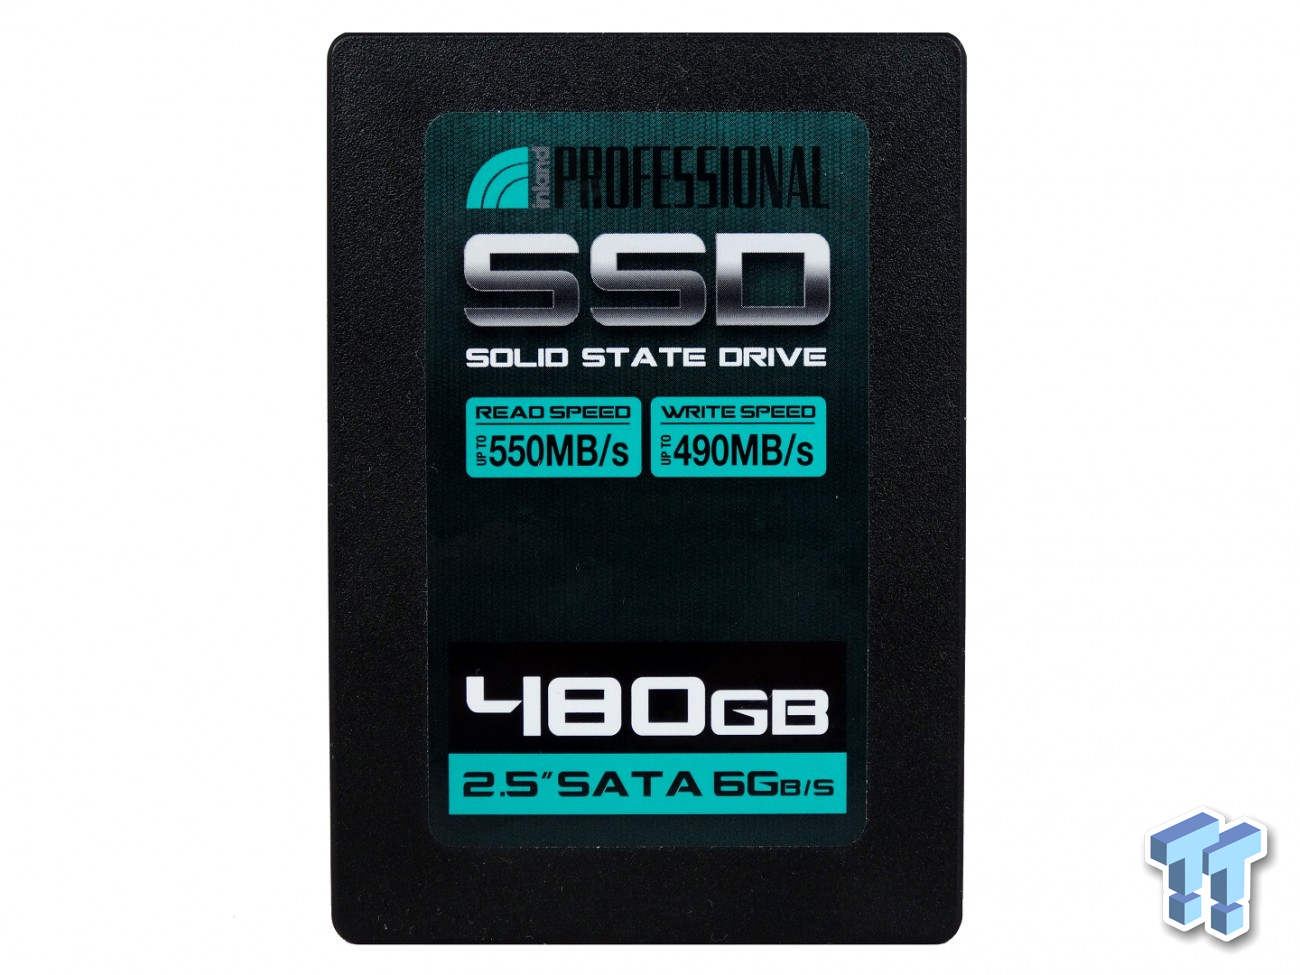 INLAND Platinum 2TB SSD TLC 3D NAND SATA III 6Gb/s 2.5 Inch Internal Solid  State Drive, Upgrade Desktop PC or Laptop Memory and Storage